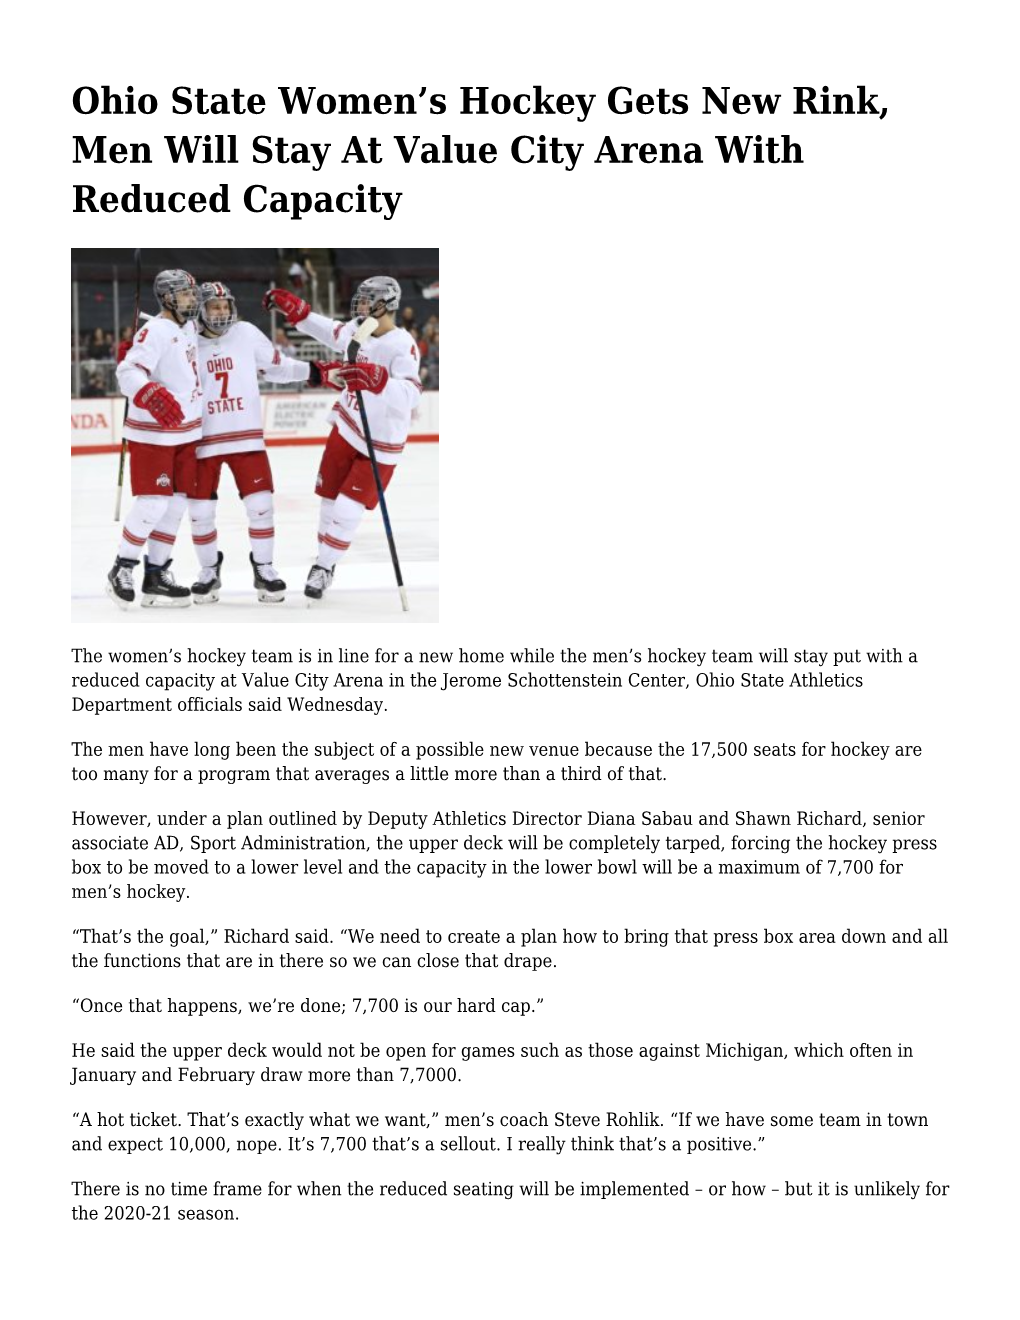 S Hockey Gets New Rink, Men Will Stay at Value City Arena with Reduced Capacity